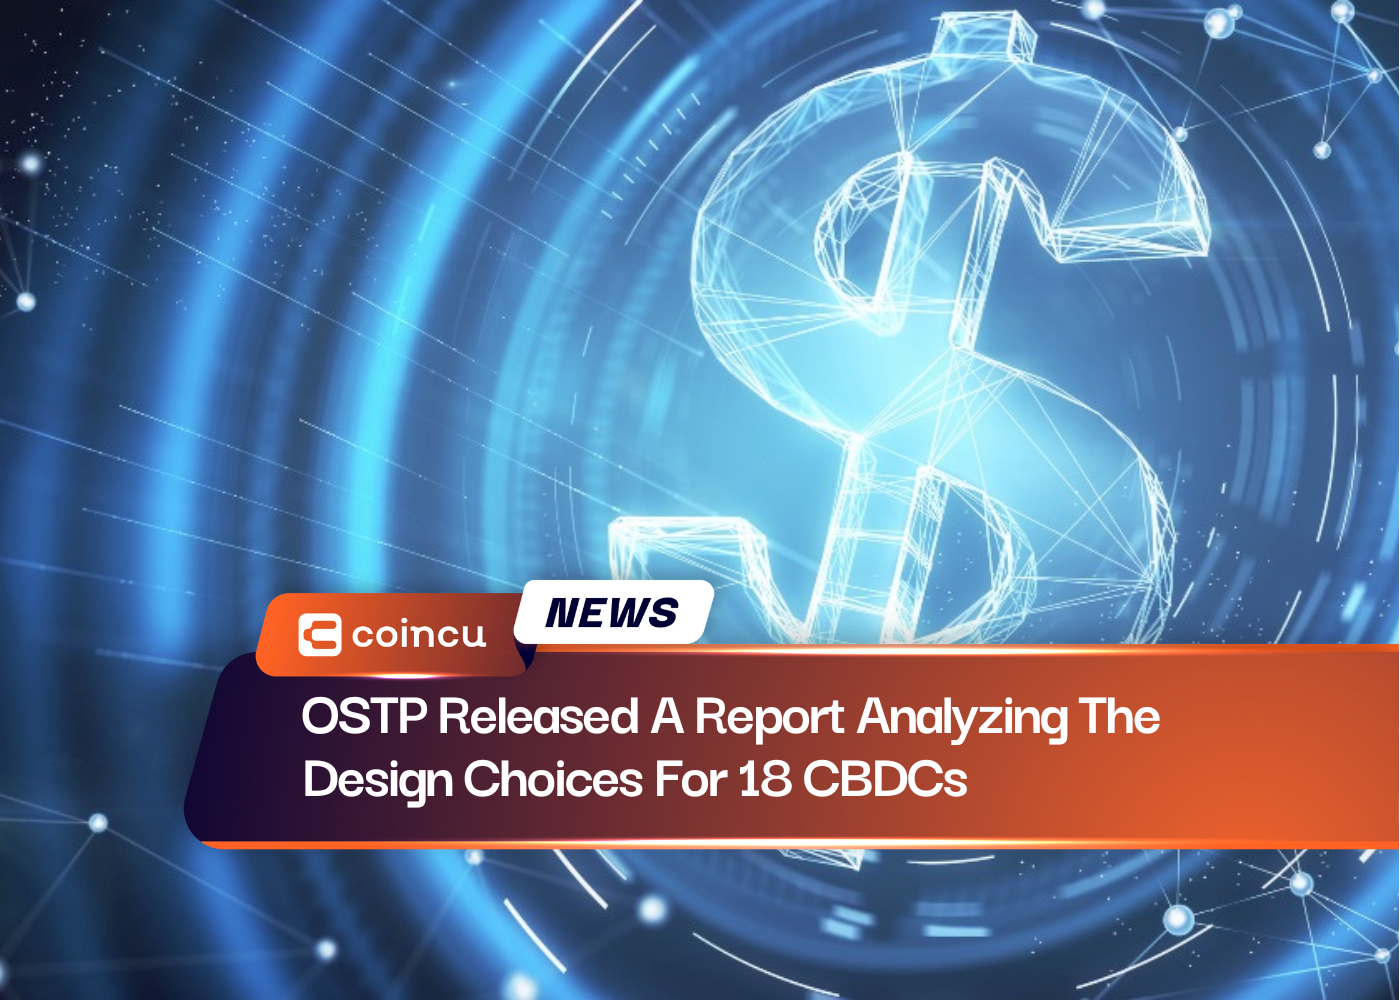 OSTP Released A Report Analyzing The Design Choices For 18 CBDCs